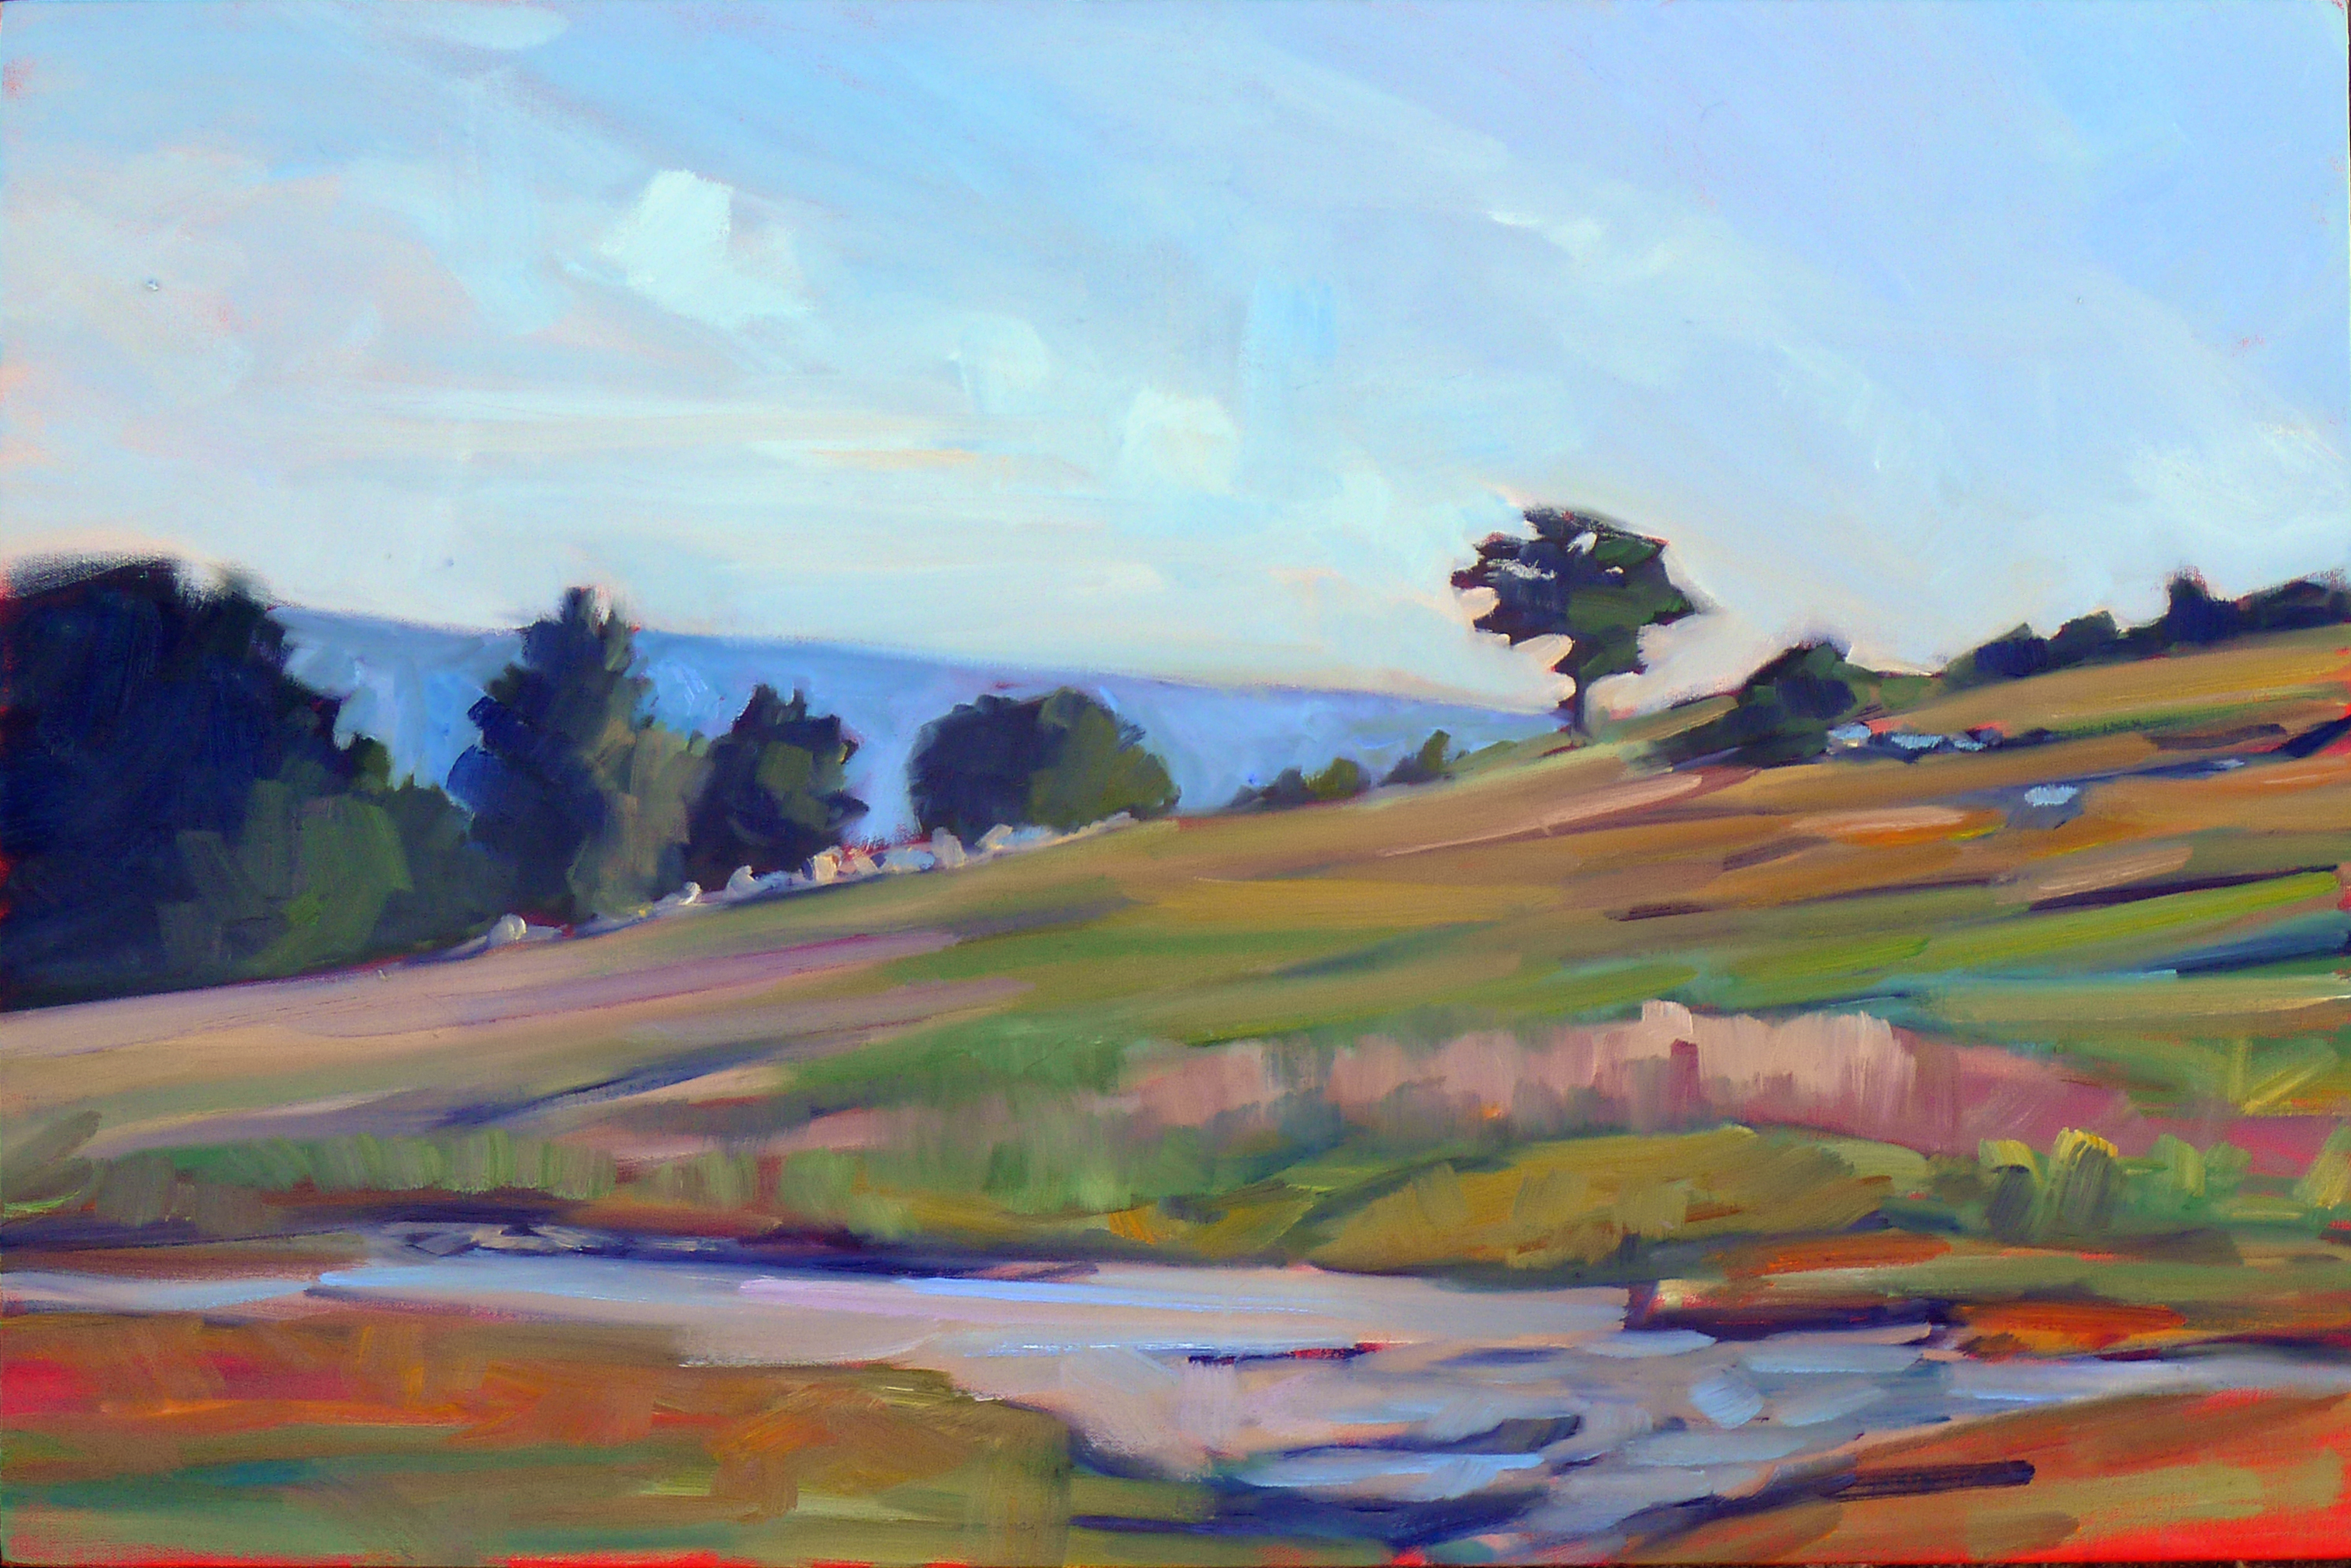 Blueberry barrens, Clary Hill, oil on canvas, 24X36, $3985 framed includes shipping and handling in continental US.